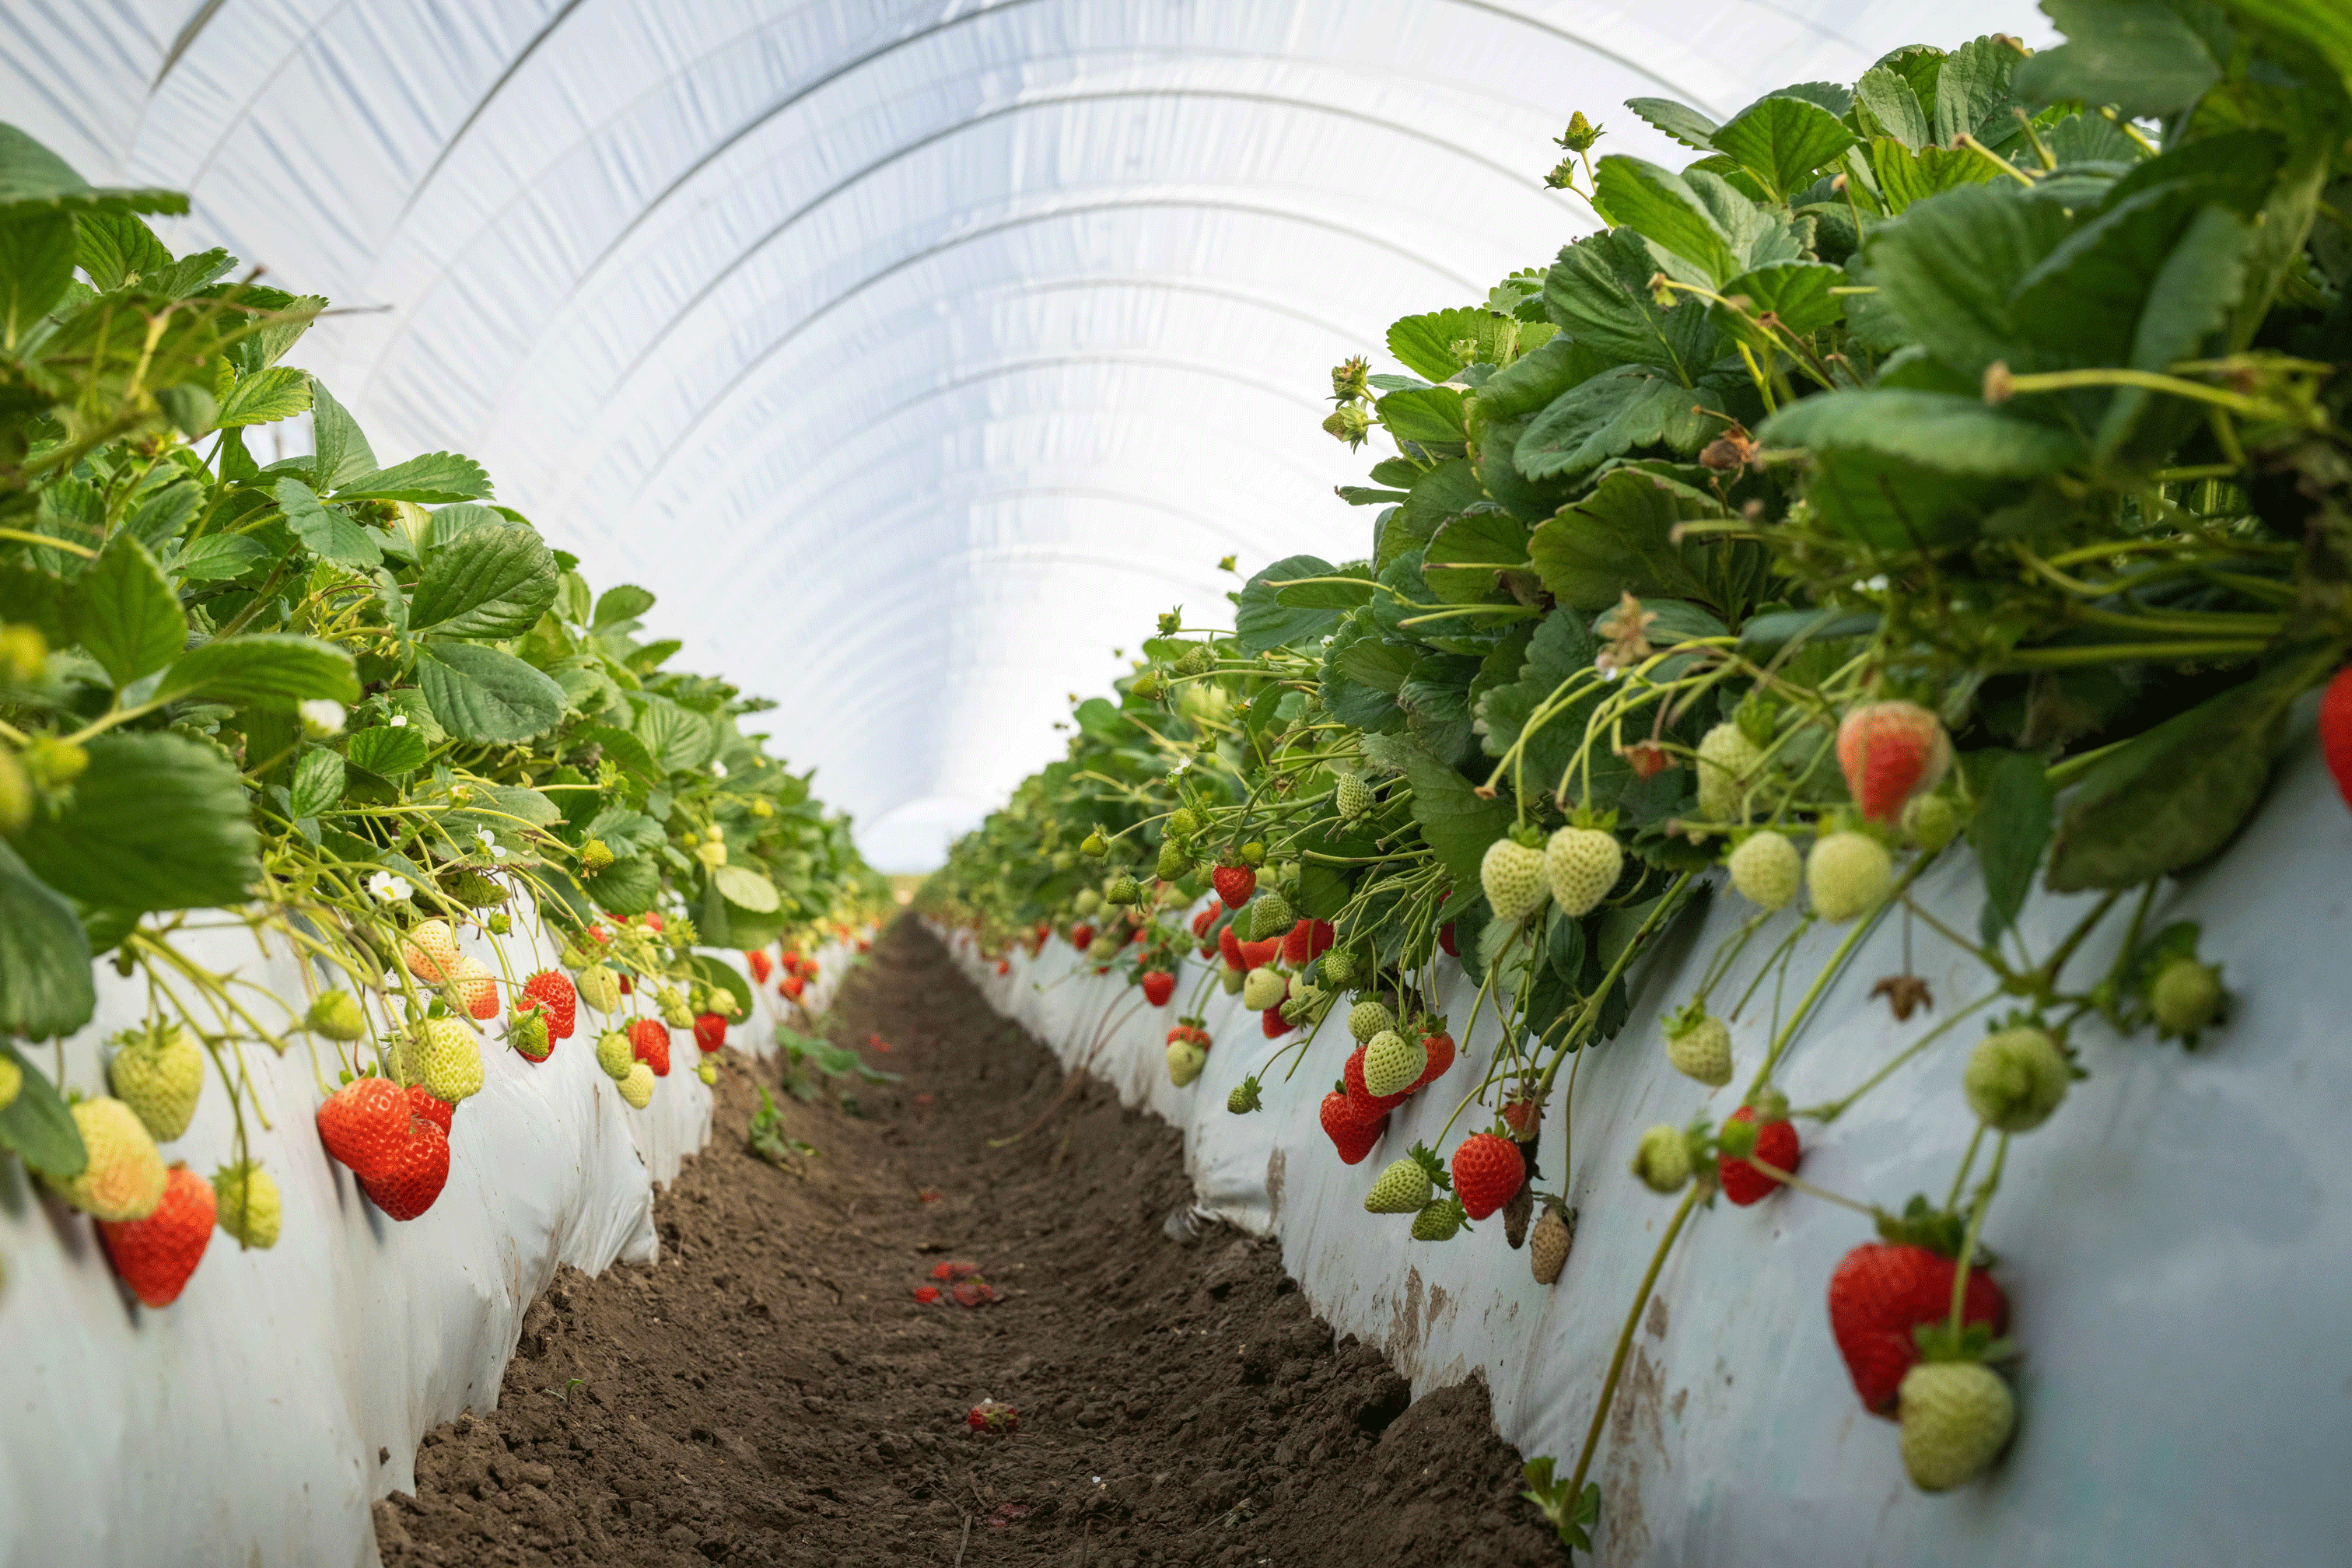 Inside a white-shrouded hoop-house, a close-up view along a white-covered mound with strawberry plants planted along the top and long-stemmed berries hanging down.